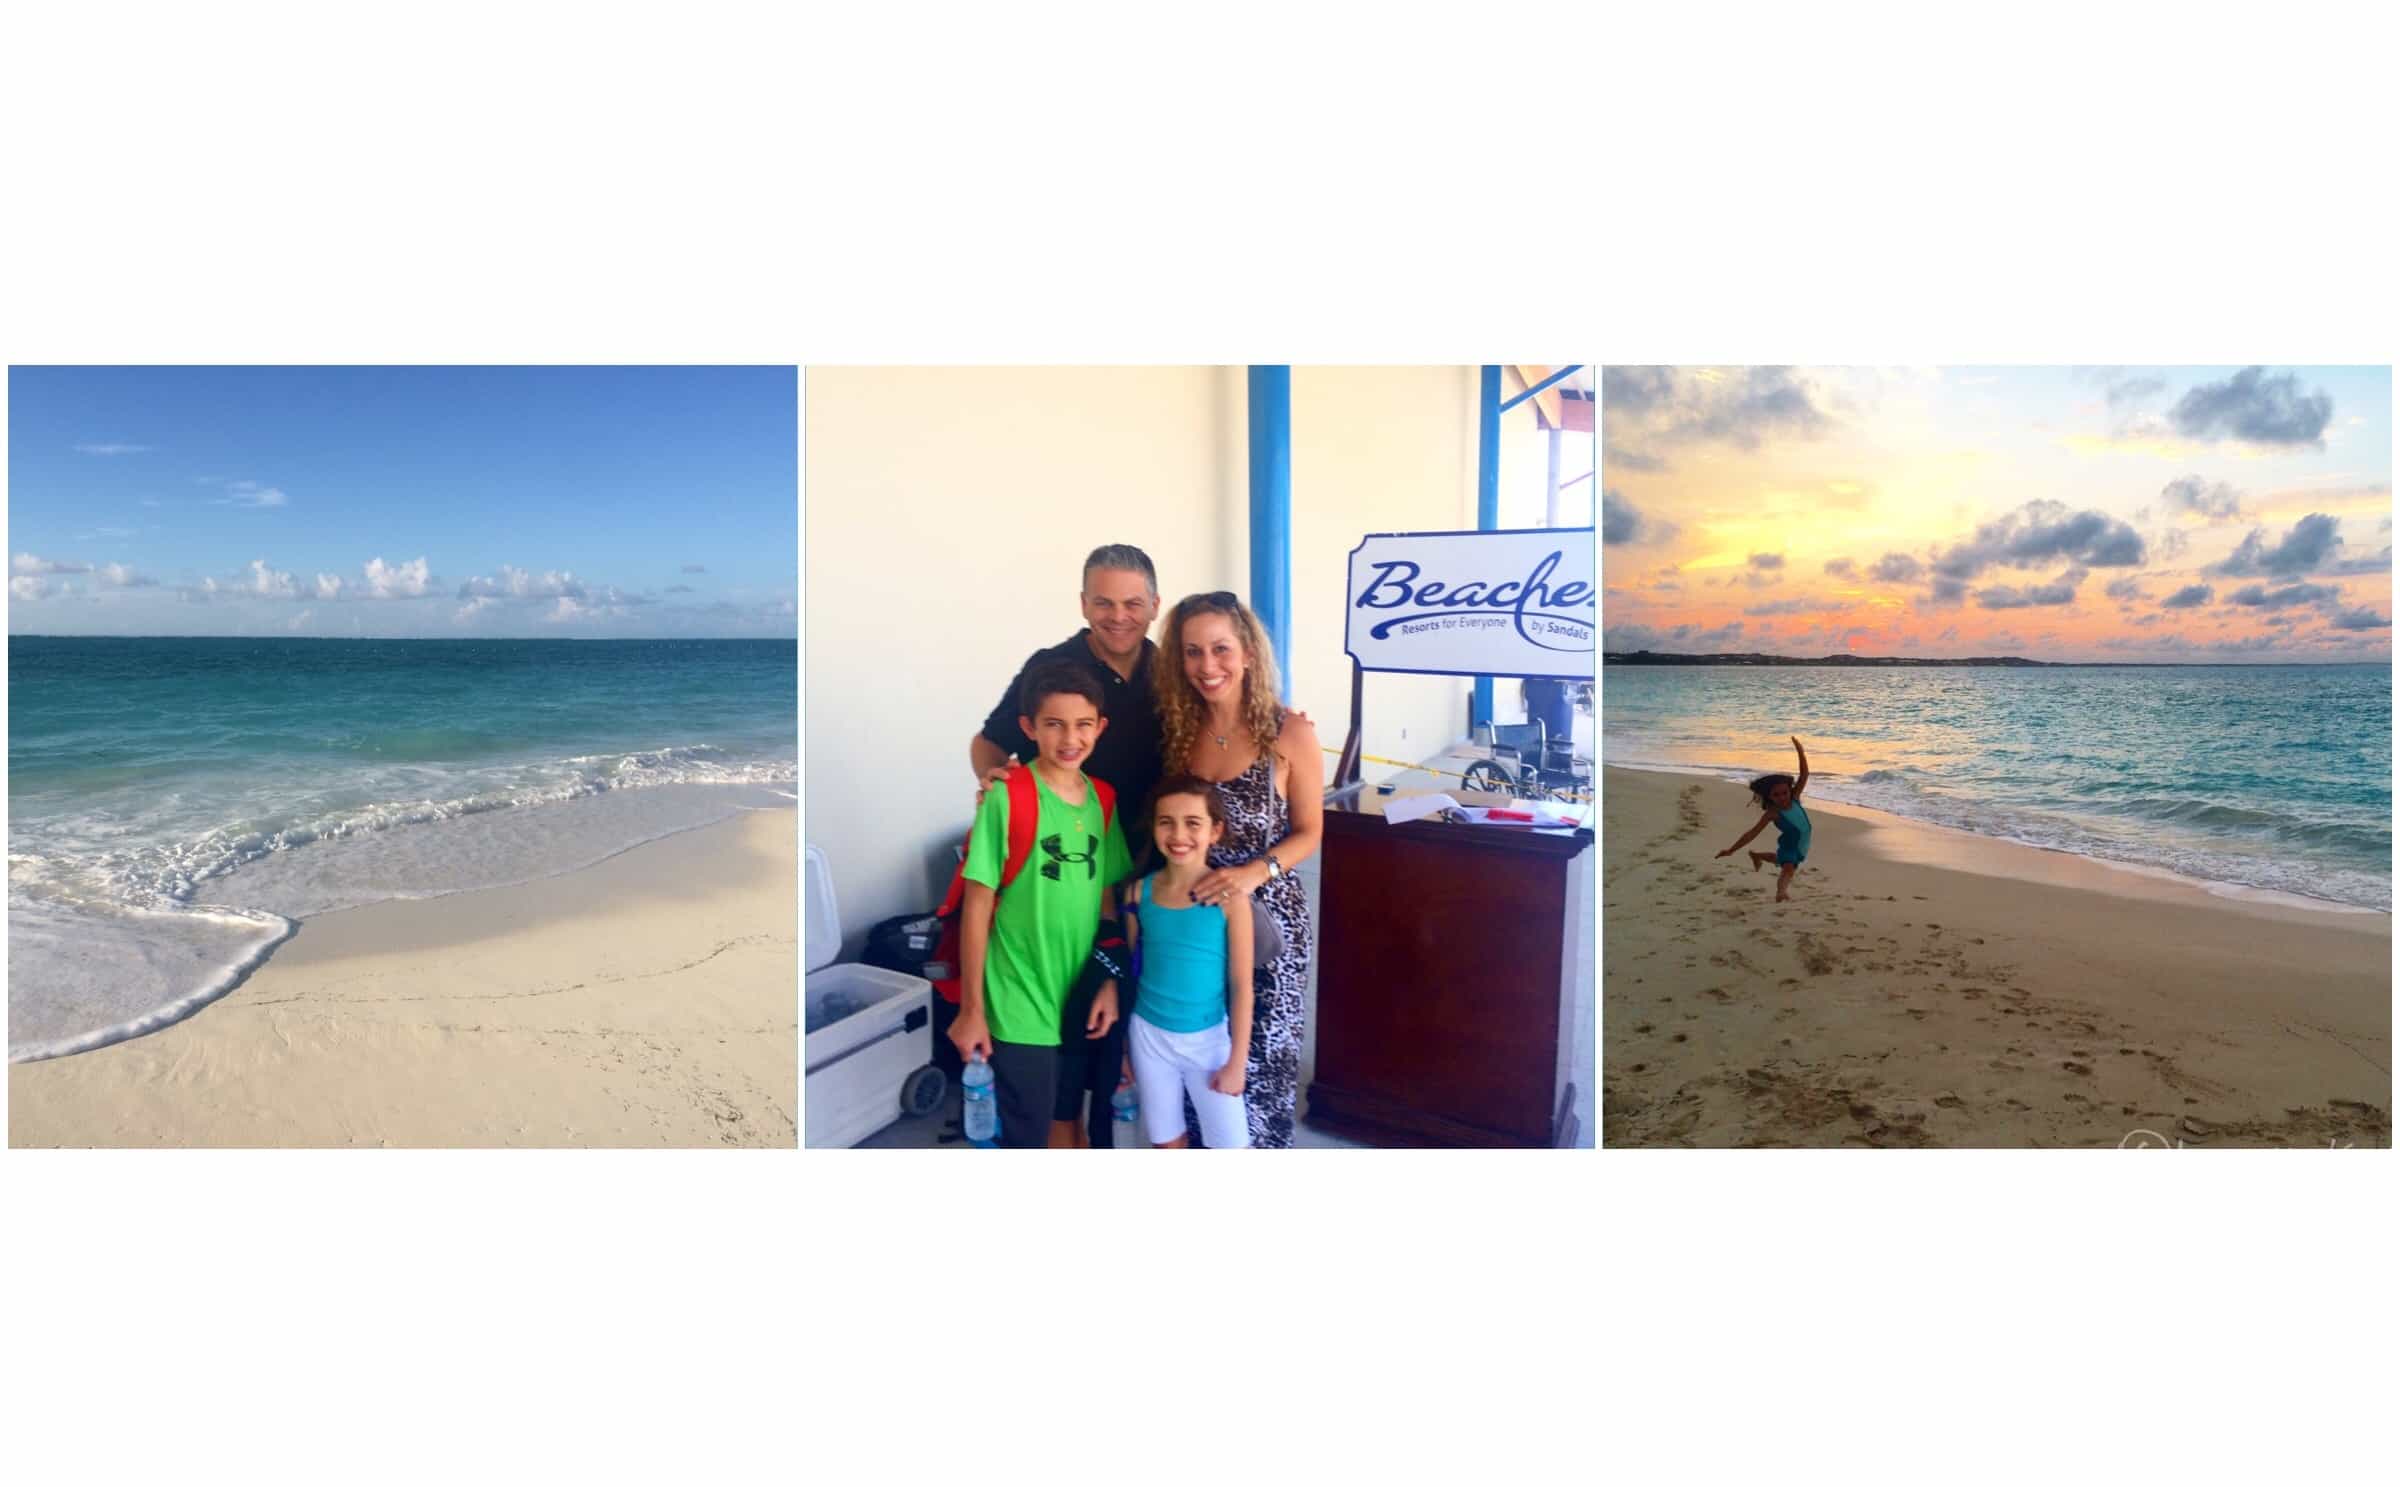 5 reasons why you should take your family to Beaches Turks and Caicos